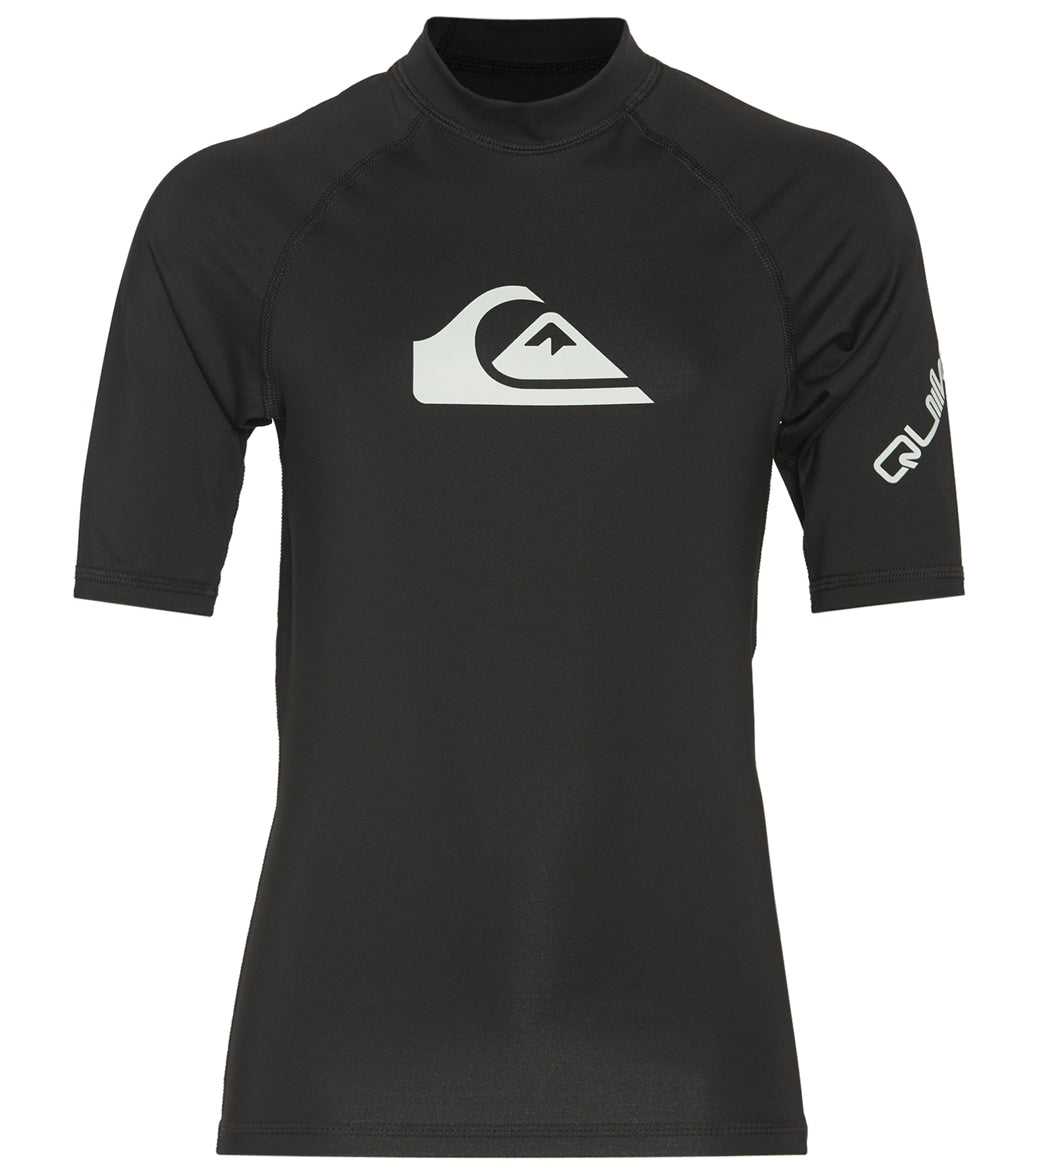 Quiksilver Youth All Time Short Sleeve UPF 50 Rash Guard